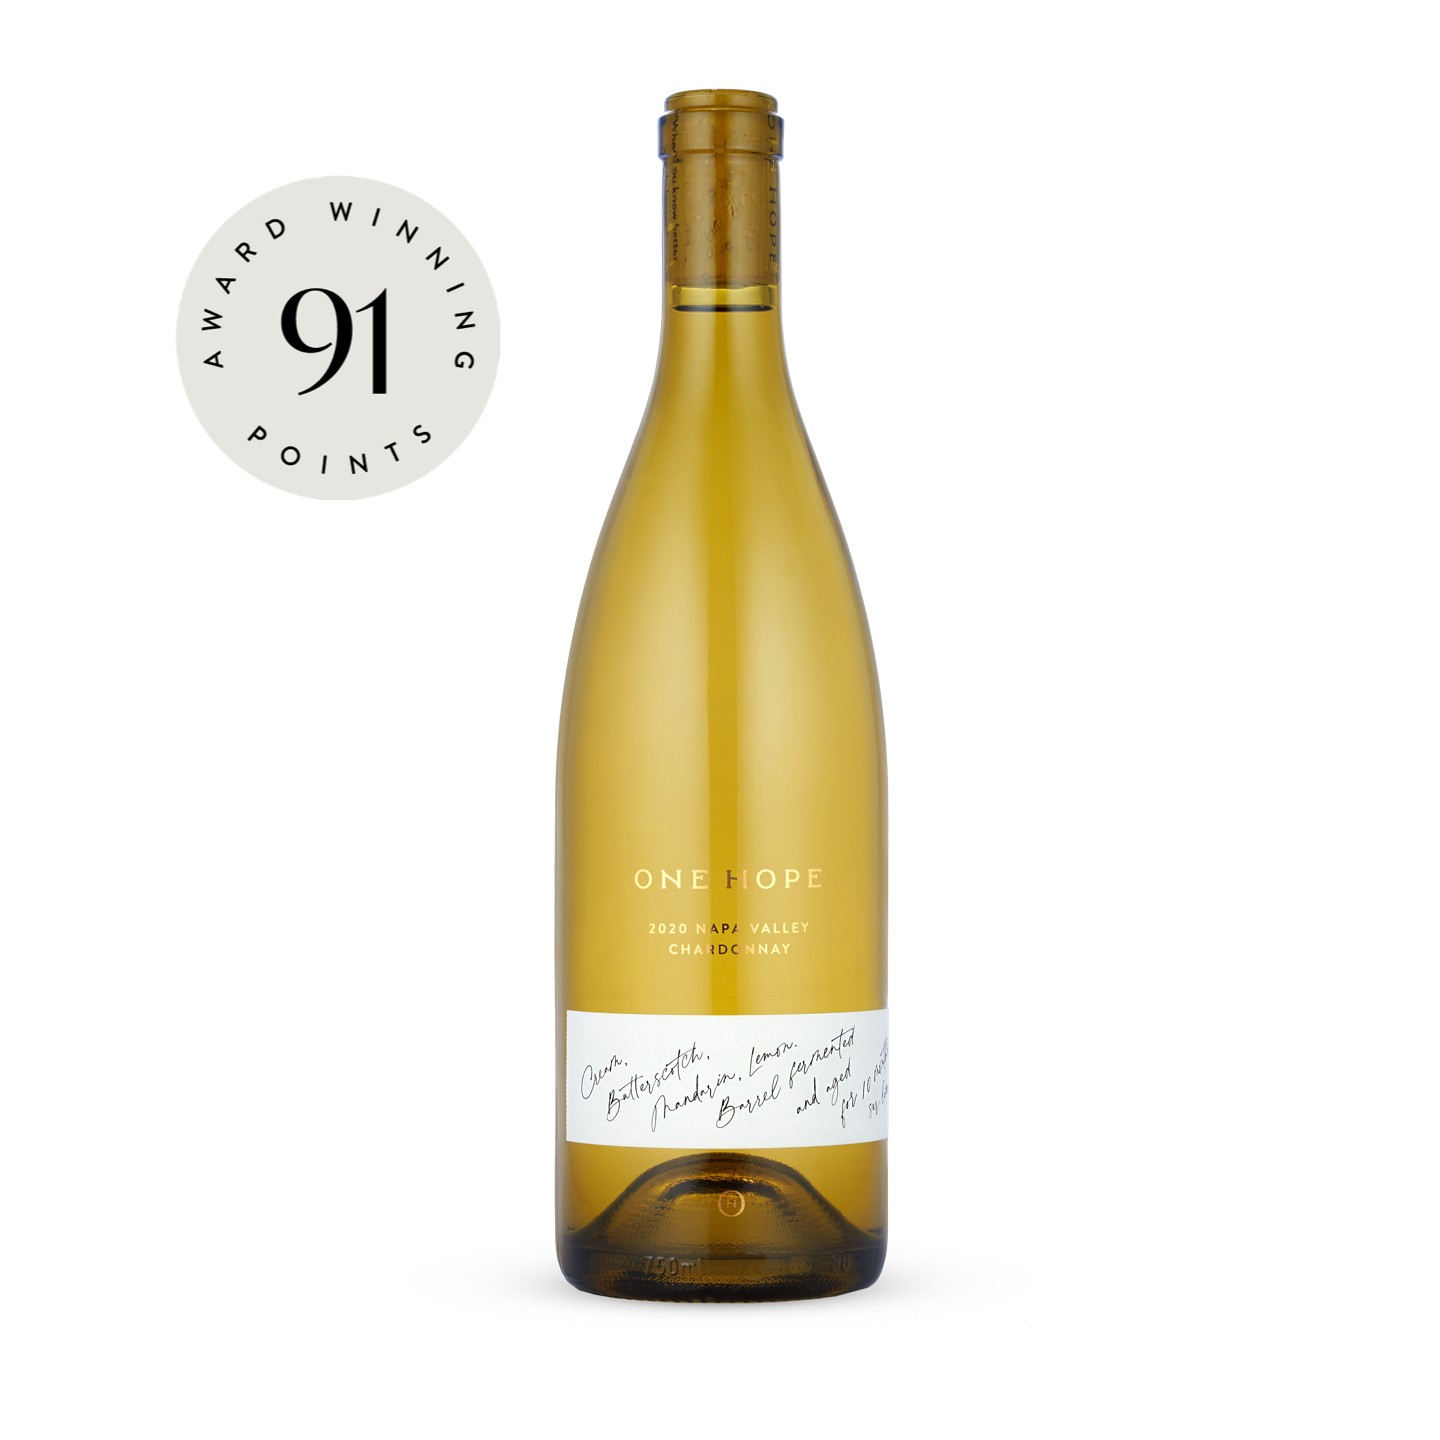 Shop our Best Chardonnay Napa Valley at ONEHOPE